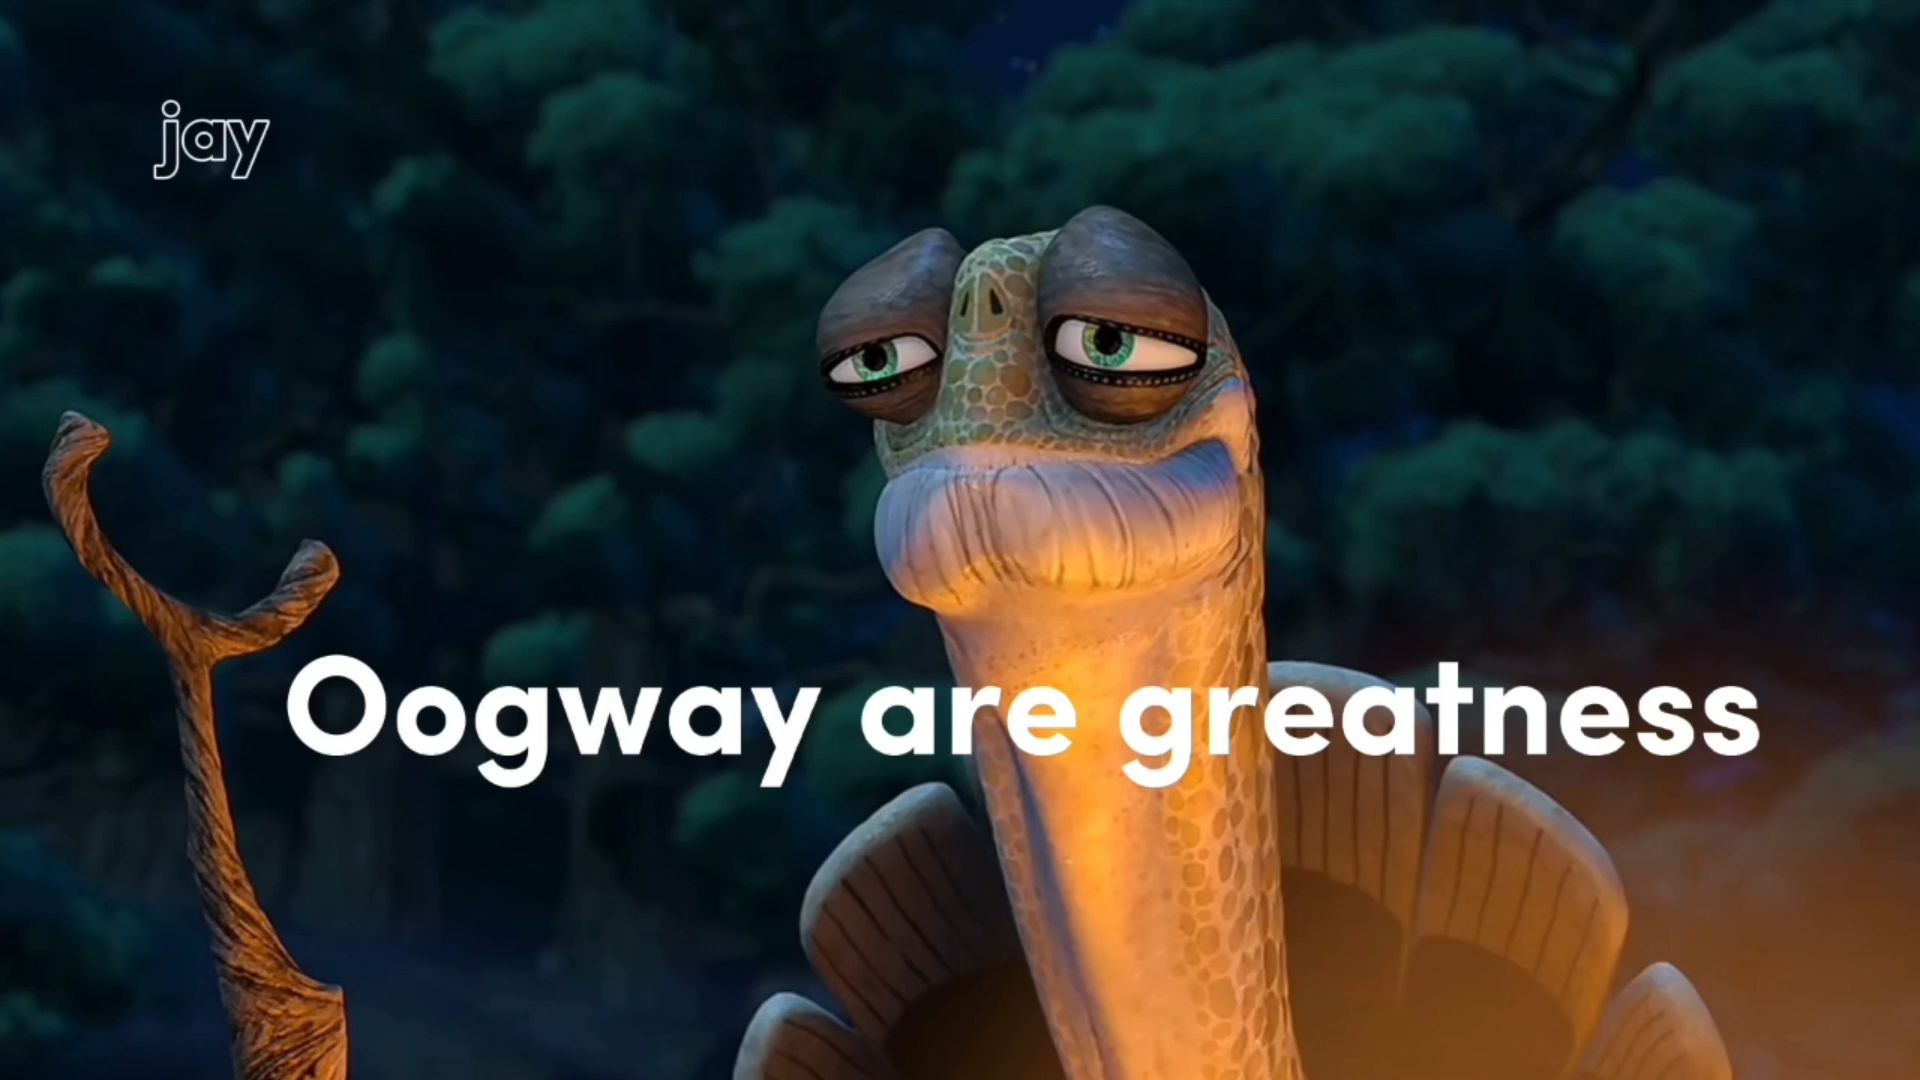 Master oogway quotes that will reached your heart - Bilibili